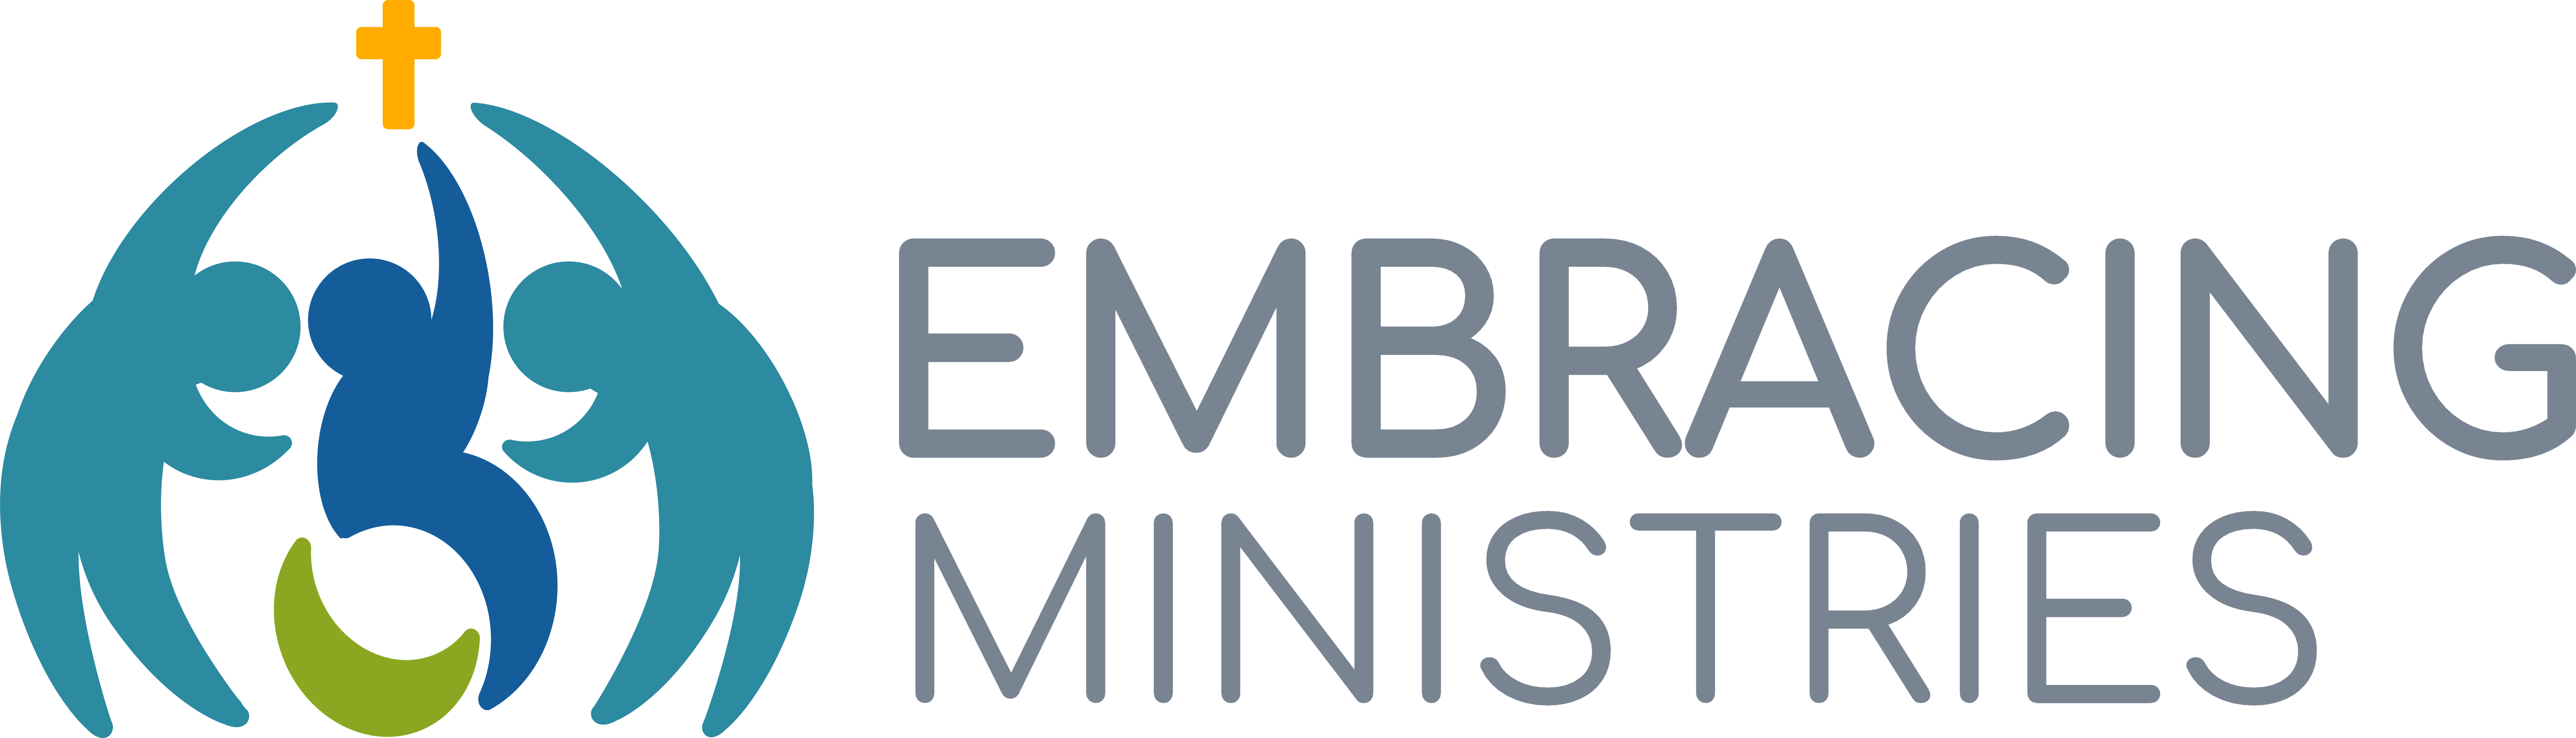 Embracing Ministries